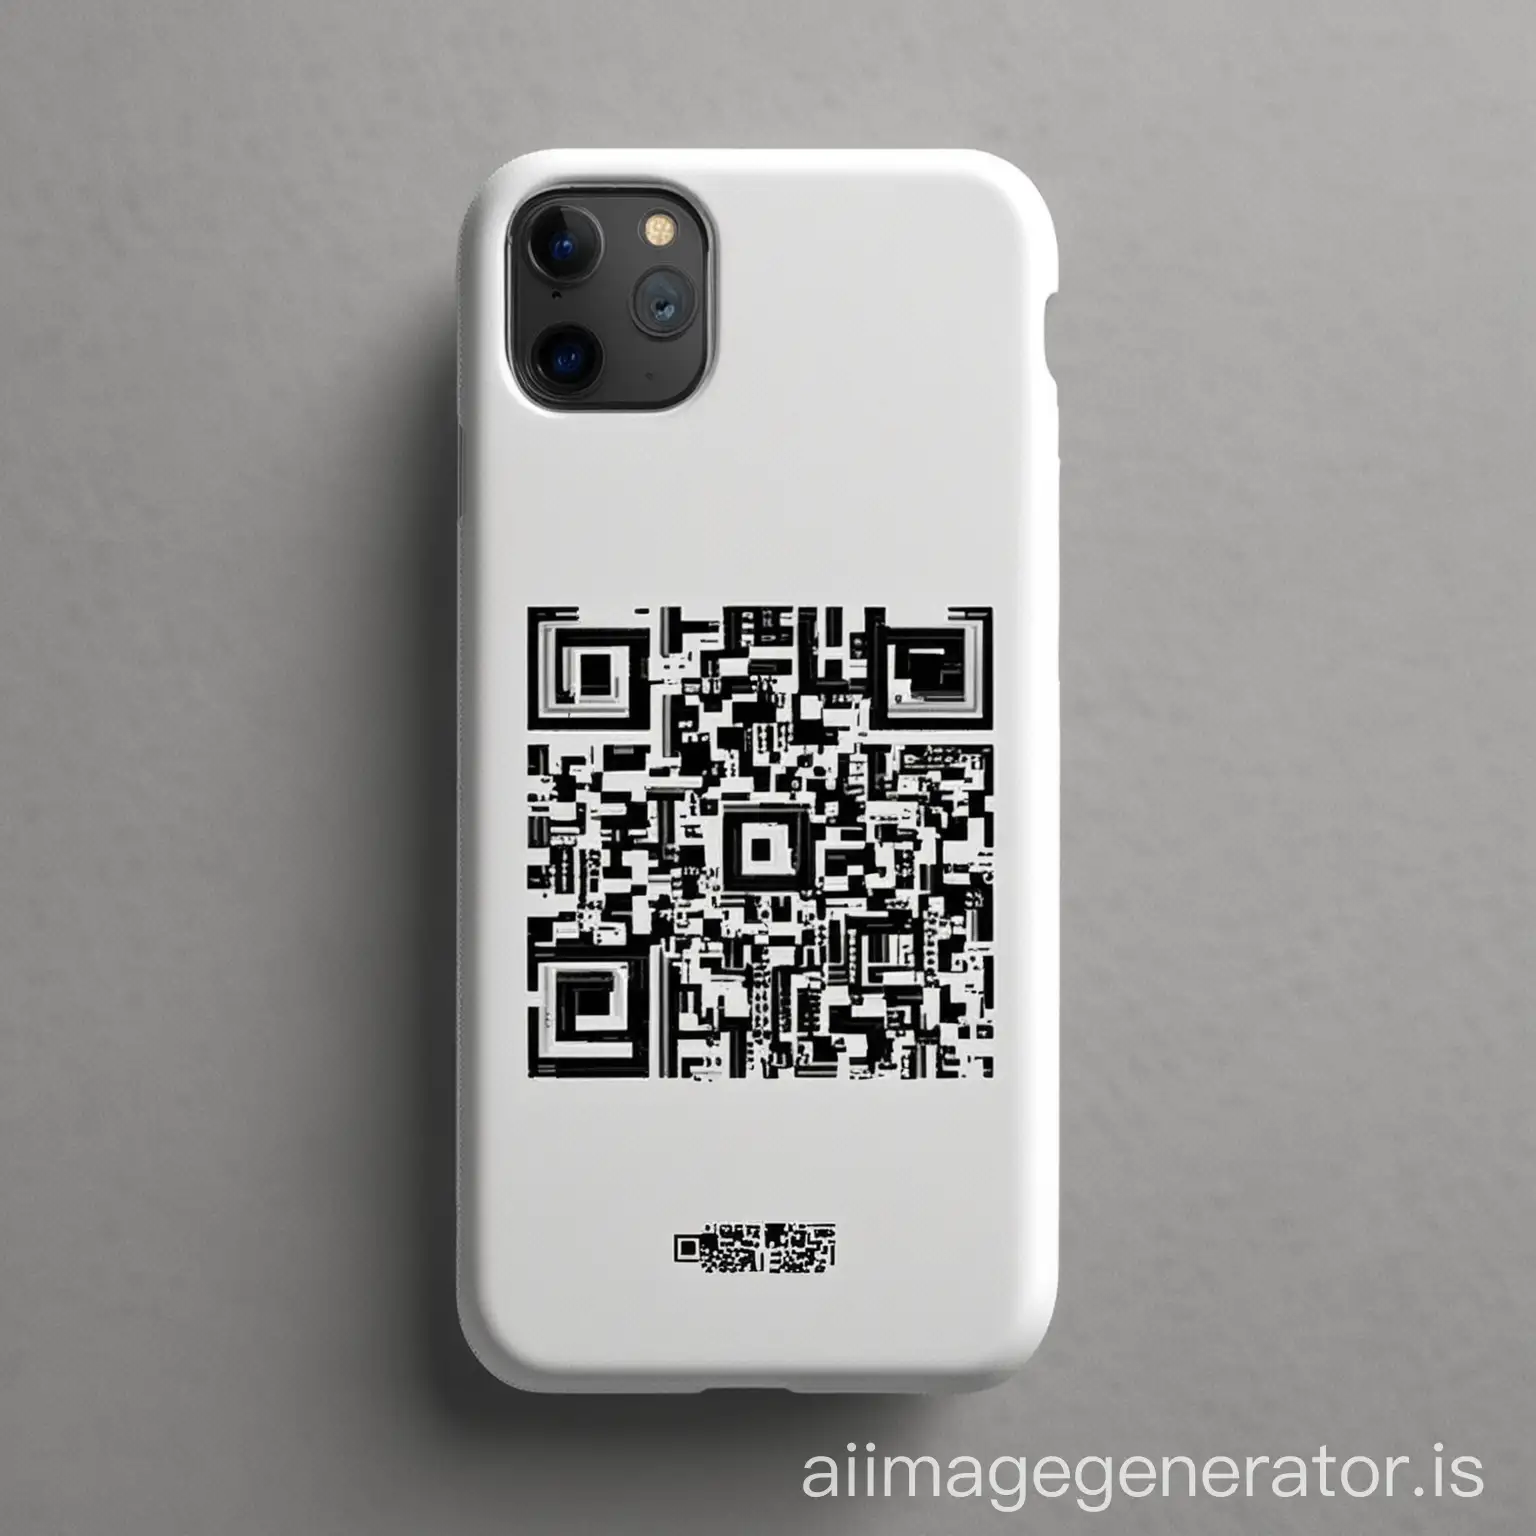 Make a white 
phone case design which contains a QR code, below the code write my insta
